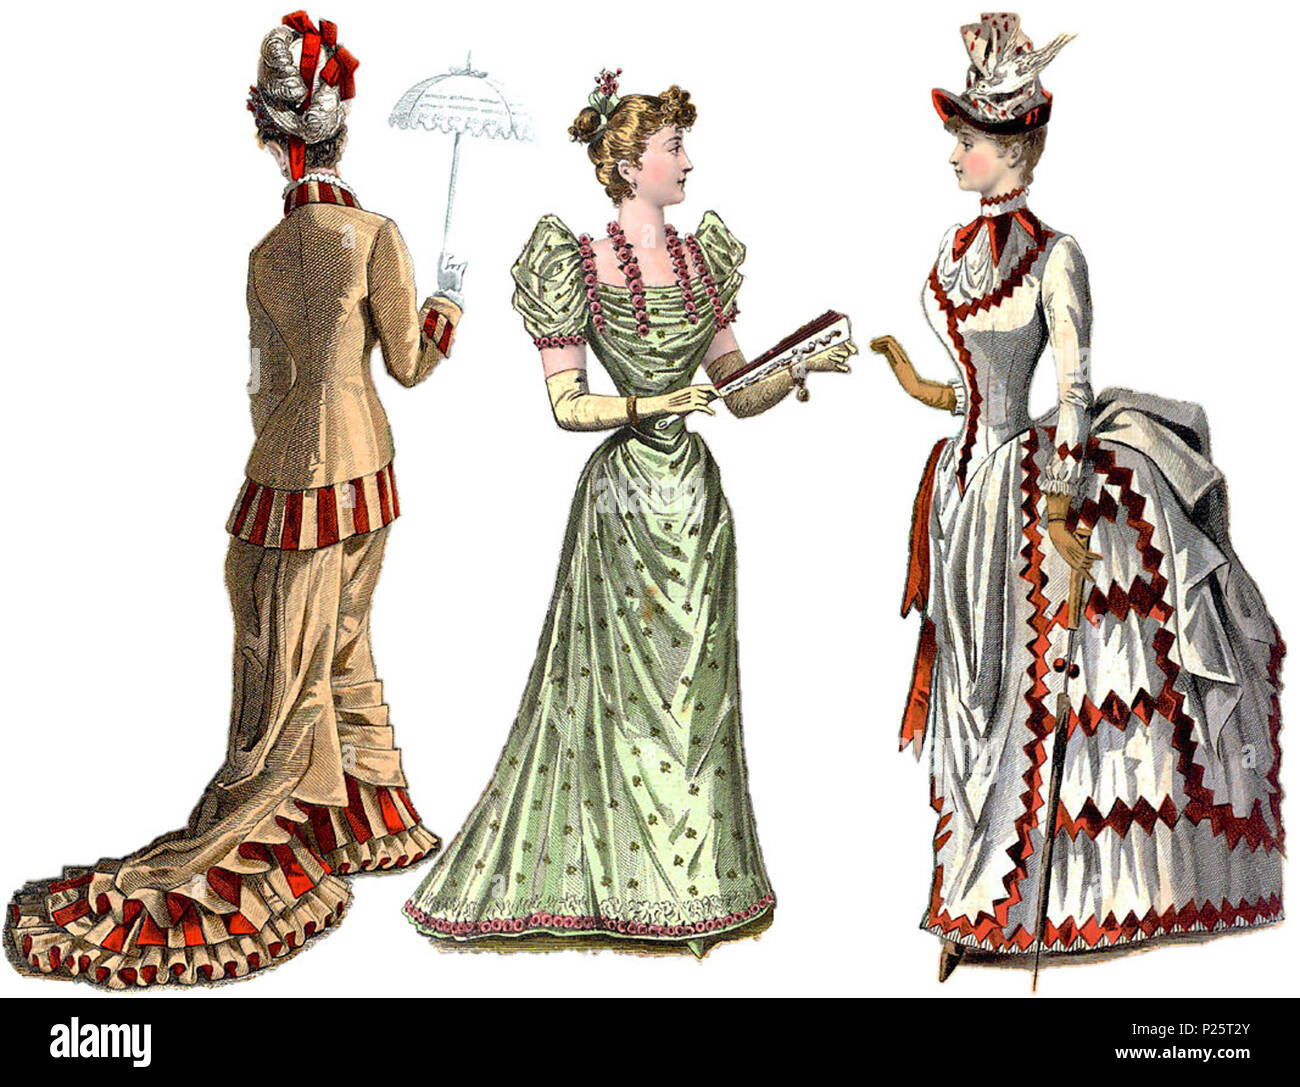 .  Style overview taken from 1880s fashion plates (a composite of what were originally parts of three separate plates) Left: early 1880's daywear (continuing the tight dress styles of the late 1870's, with train; compare this 1882 painting) Center: late 1880's eveningwear (anticipating the transition to the 1890's) Right: mid 1880's daywear (with bustle)  . Several years during the 1880s. Unknown 1880s artists 2 1880s-fashions-overview Stock Photo